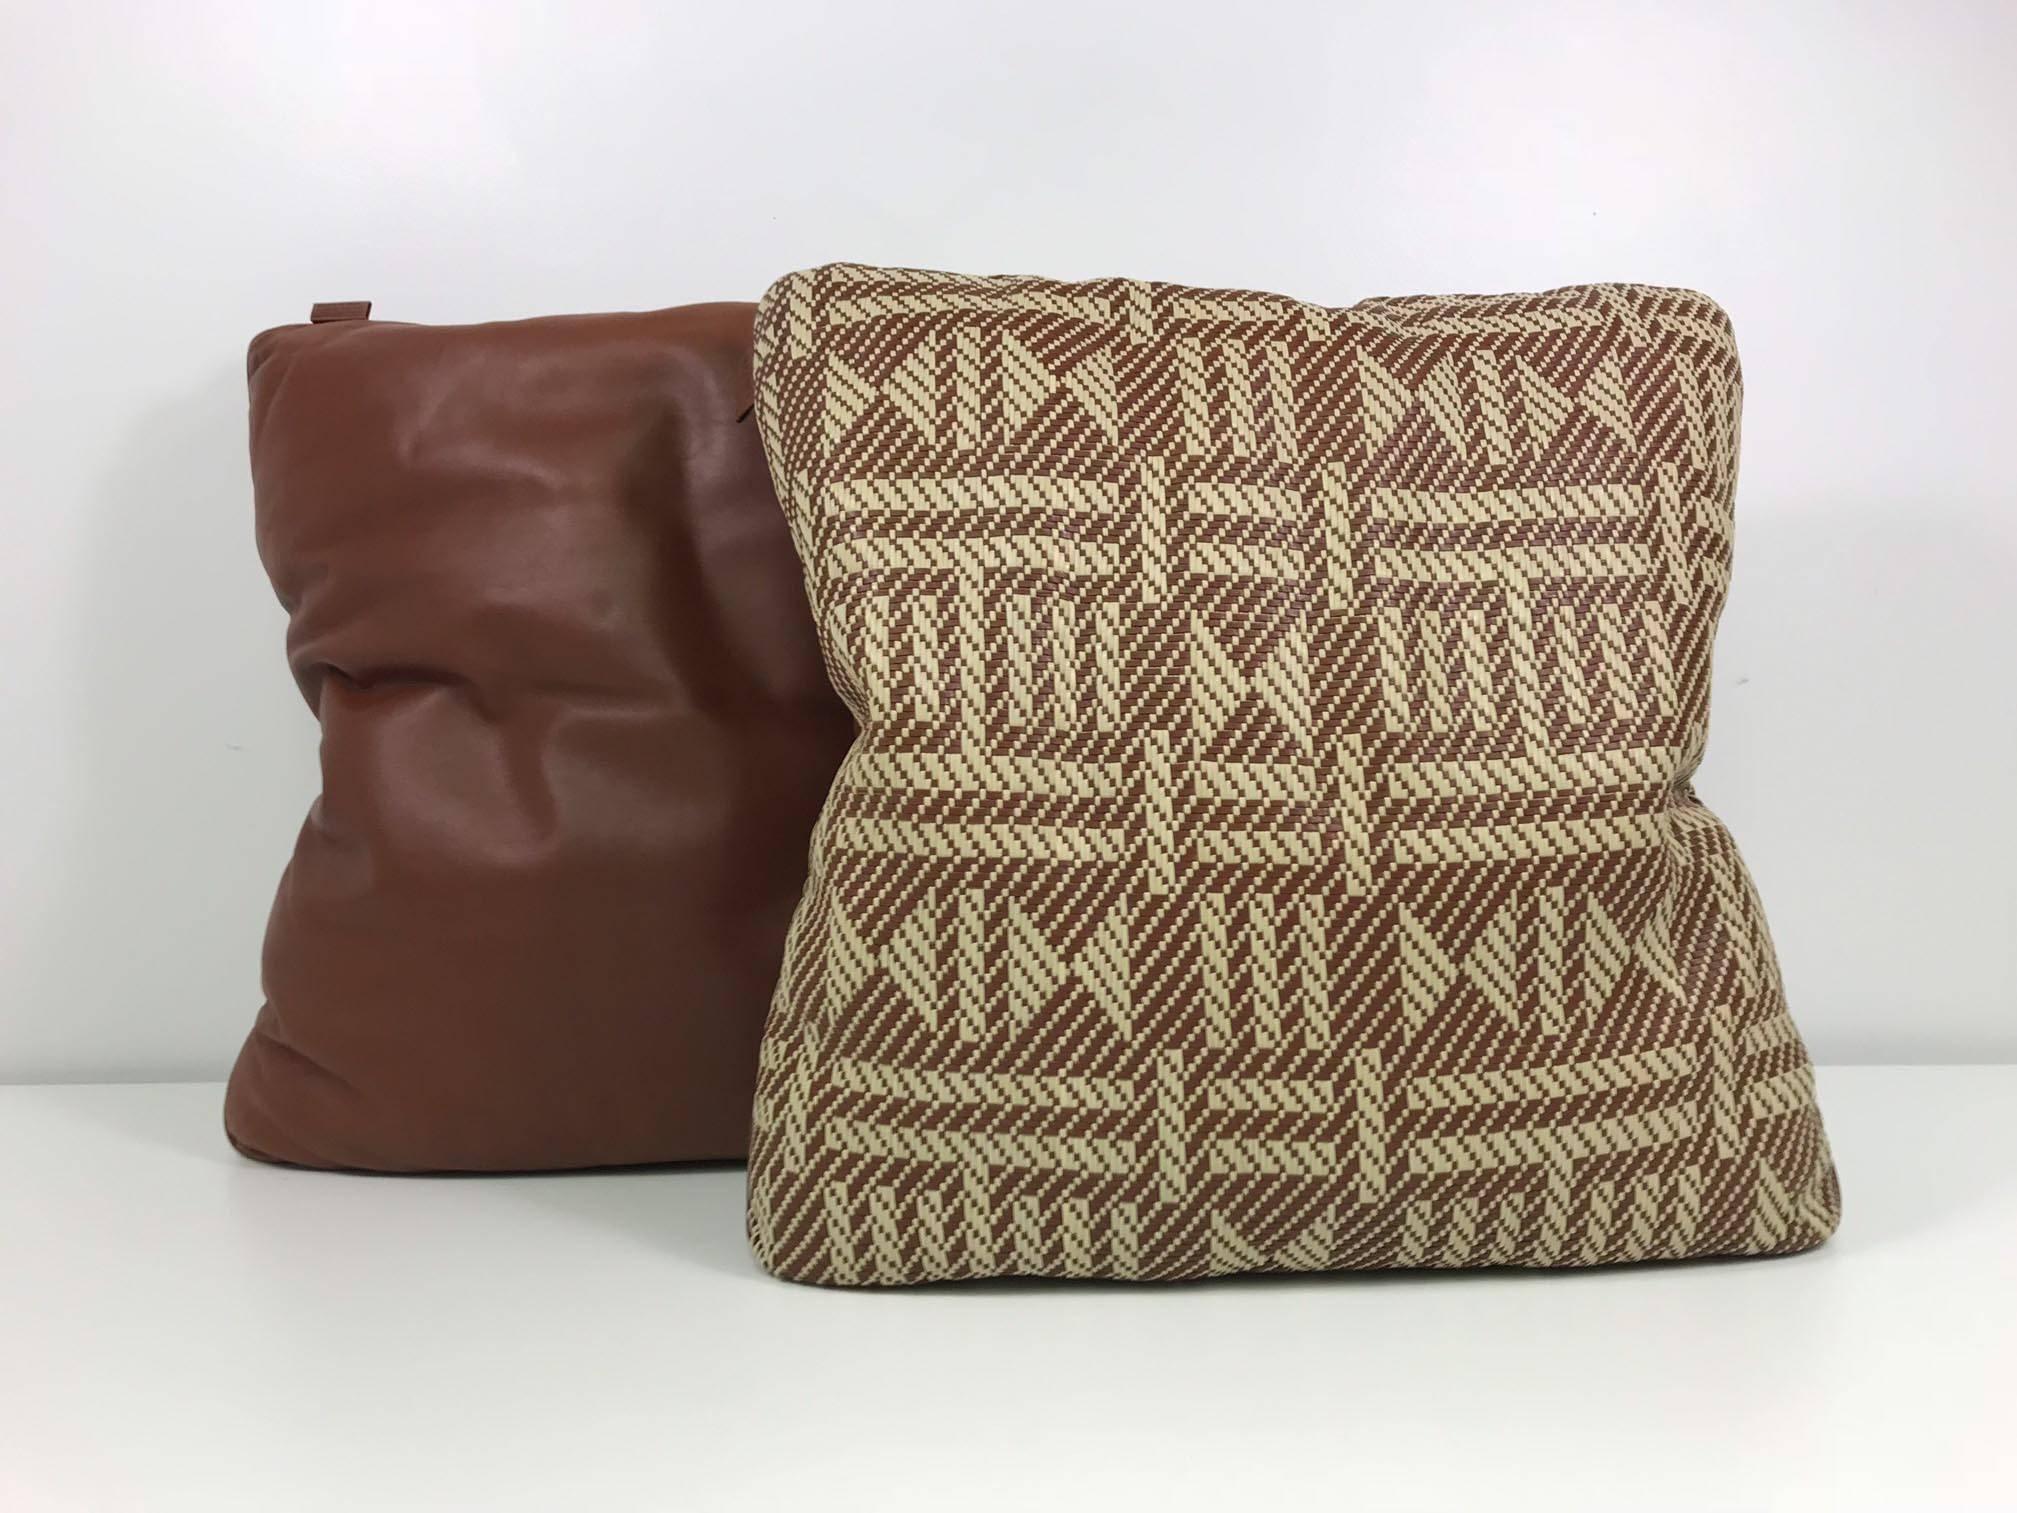 A pair of woven leather pillows by Hermès with geometric pattern. Labelled on seam.